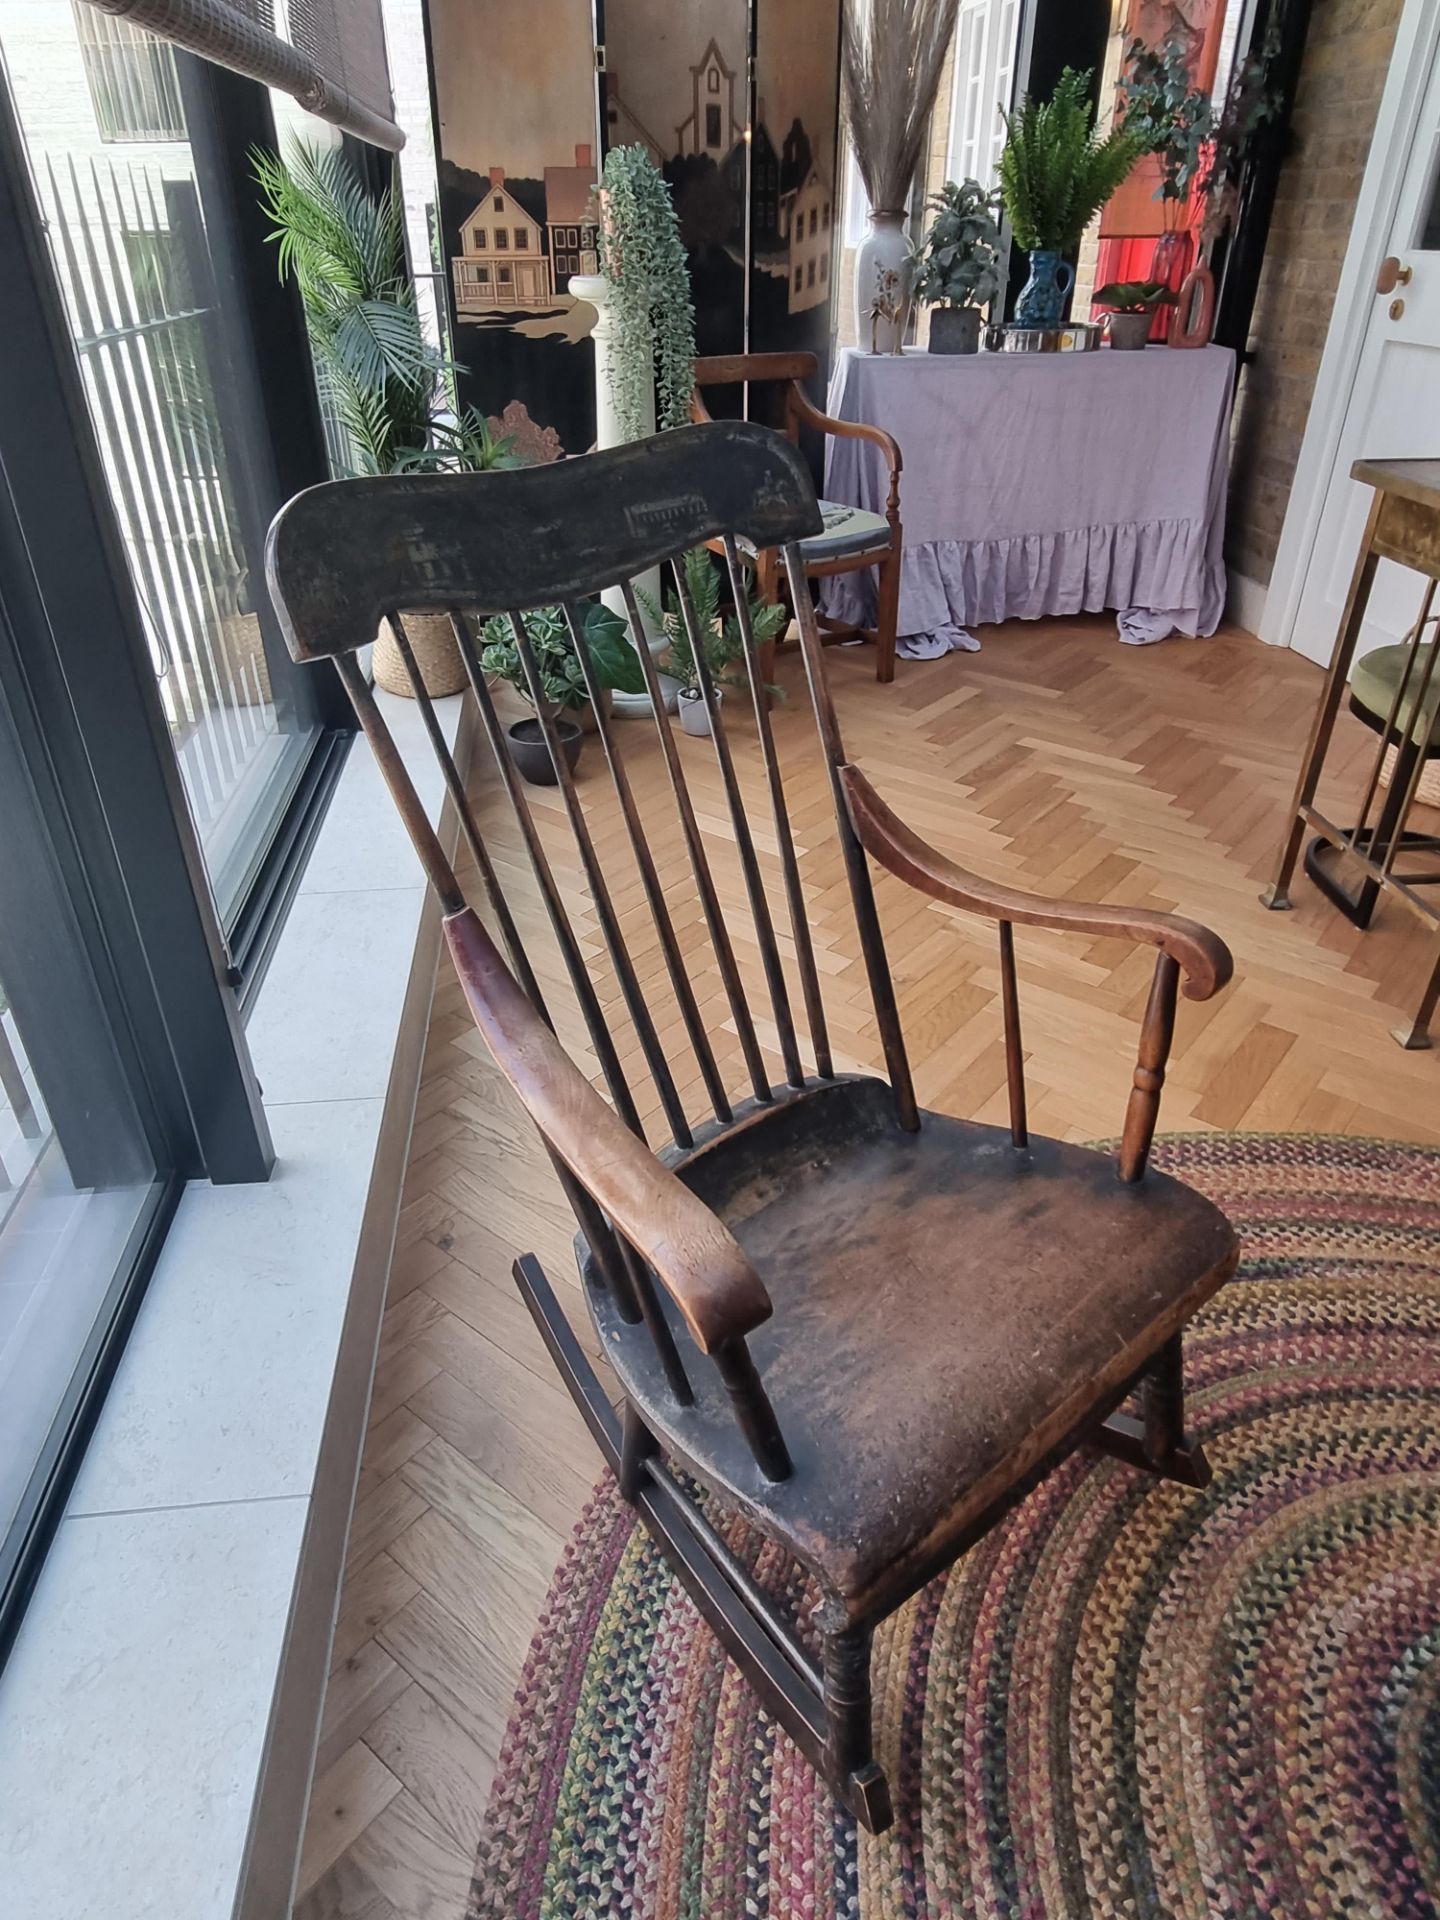 American Mid-19th Century Boston Rocker, circa 1840 This is a lovely example of a Classic American